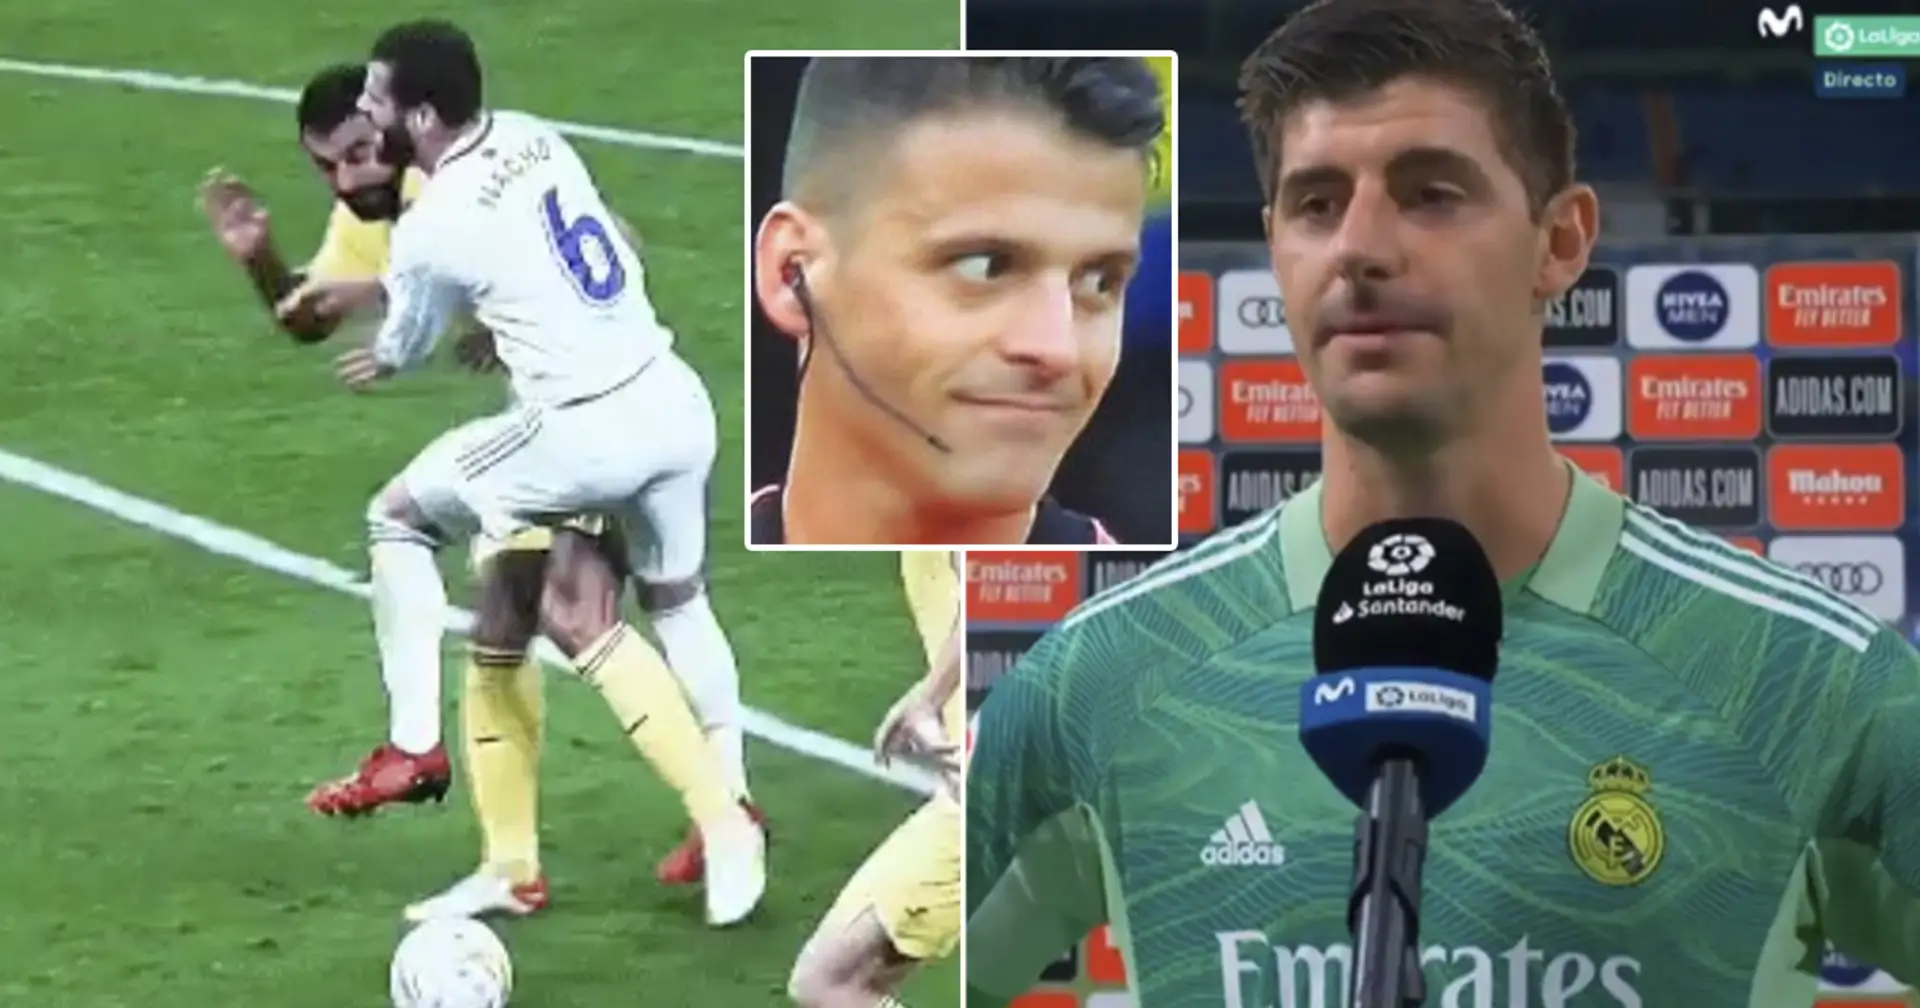 'We know what game he refereed last week': Courtois aims dig at ref amid controversial Nacho call